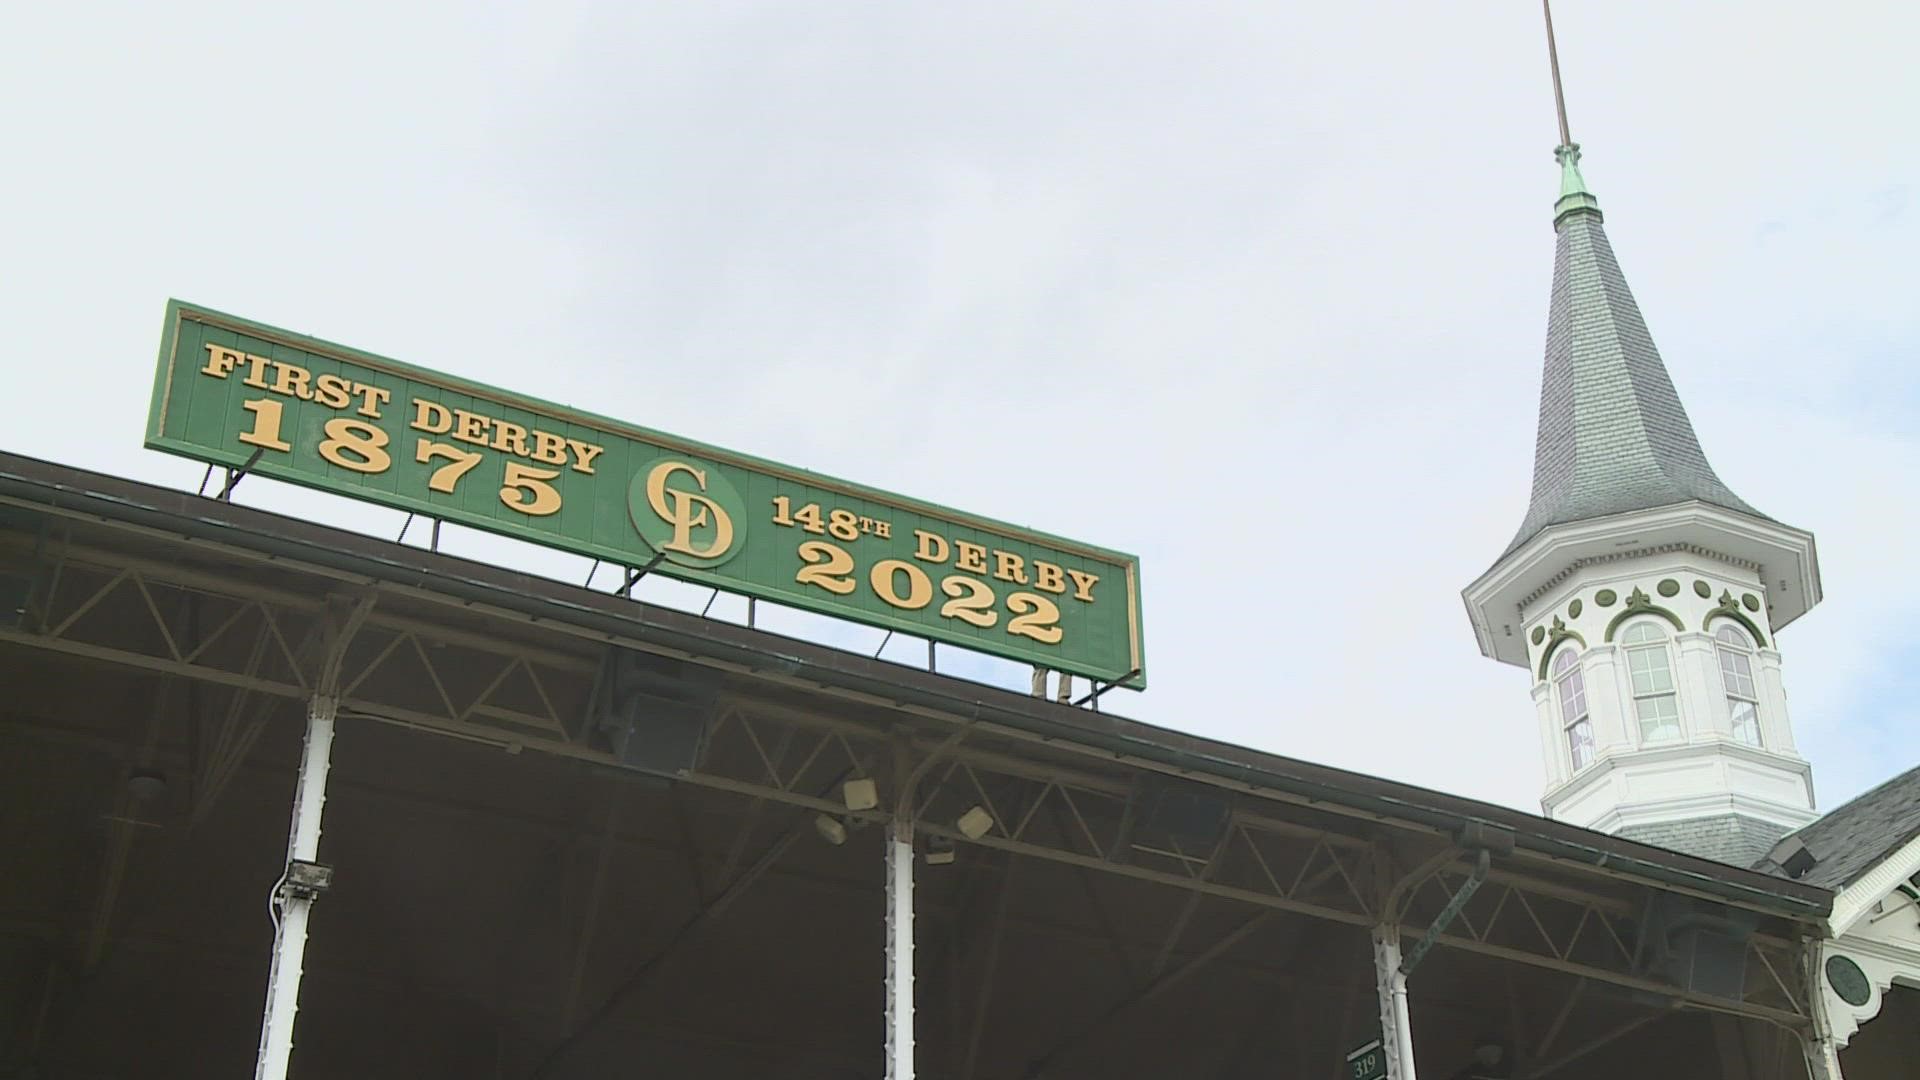 Churchill Downs changed their grandstand sign to show this is the 148th Kentucky Derby. The derby is Saturday, May 7th.